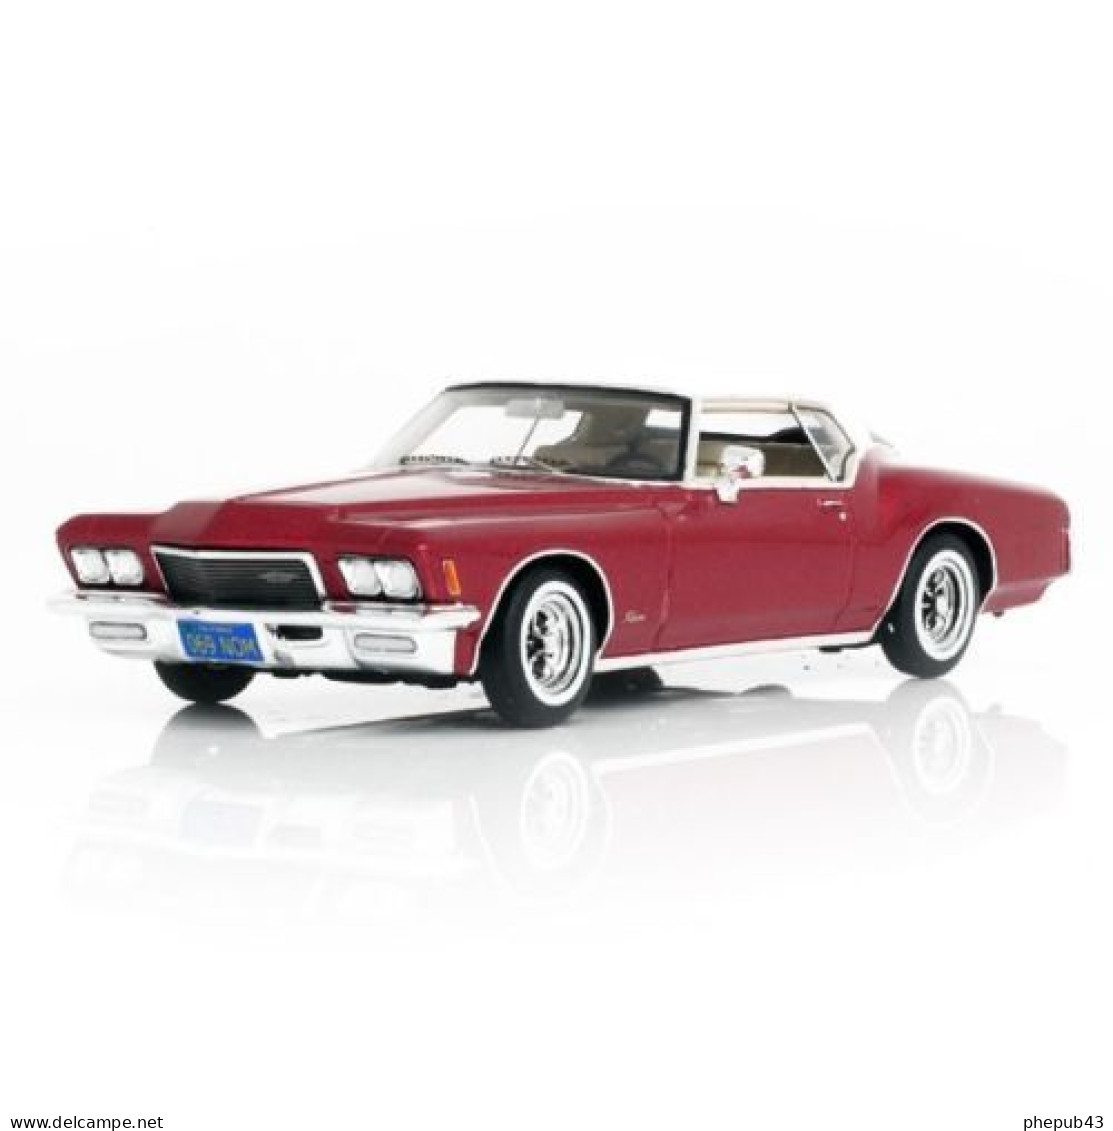 Buick Riviera - 1971 - Vintage Red - TrueScale - Spark